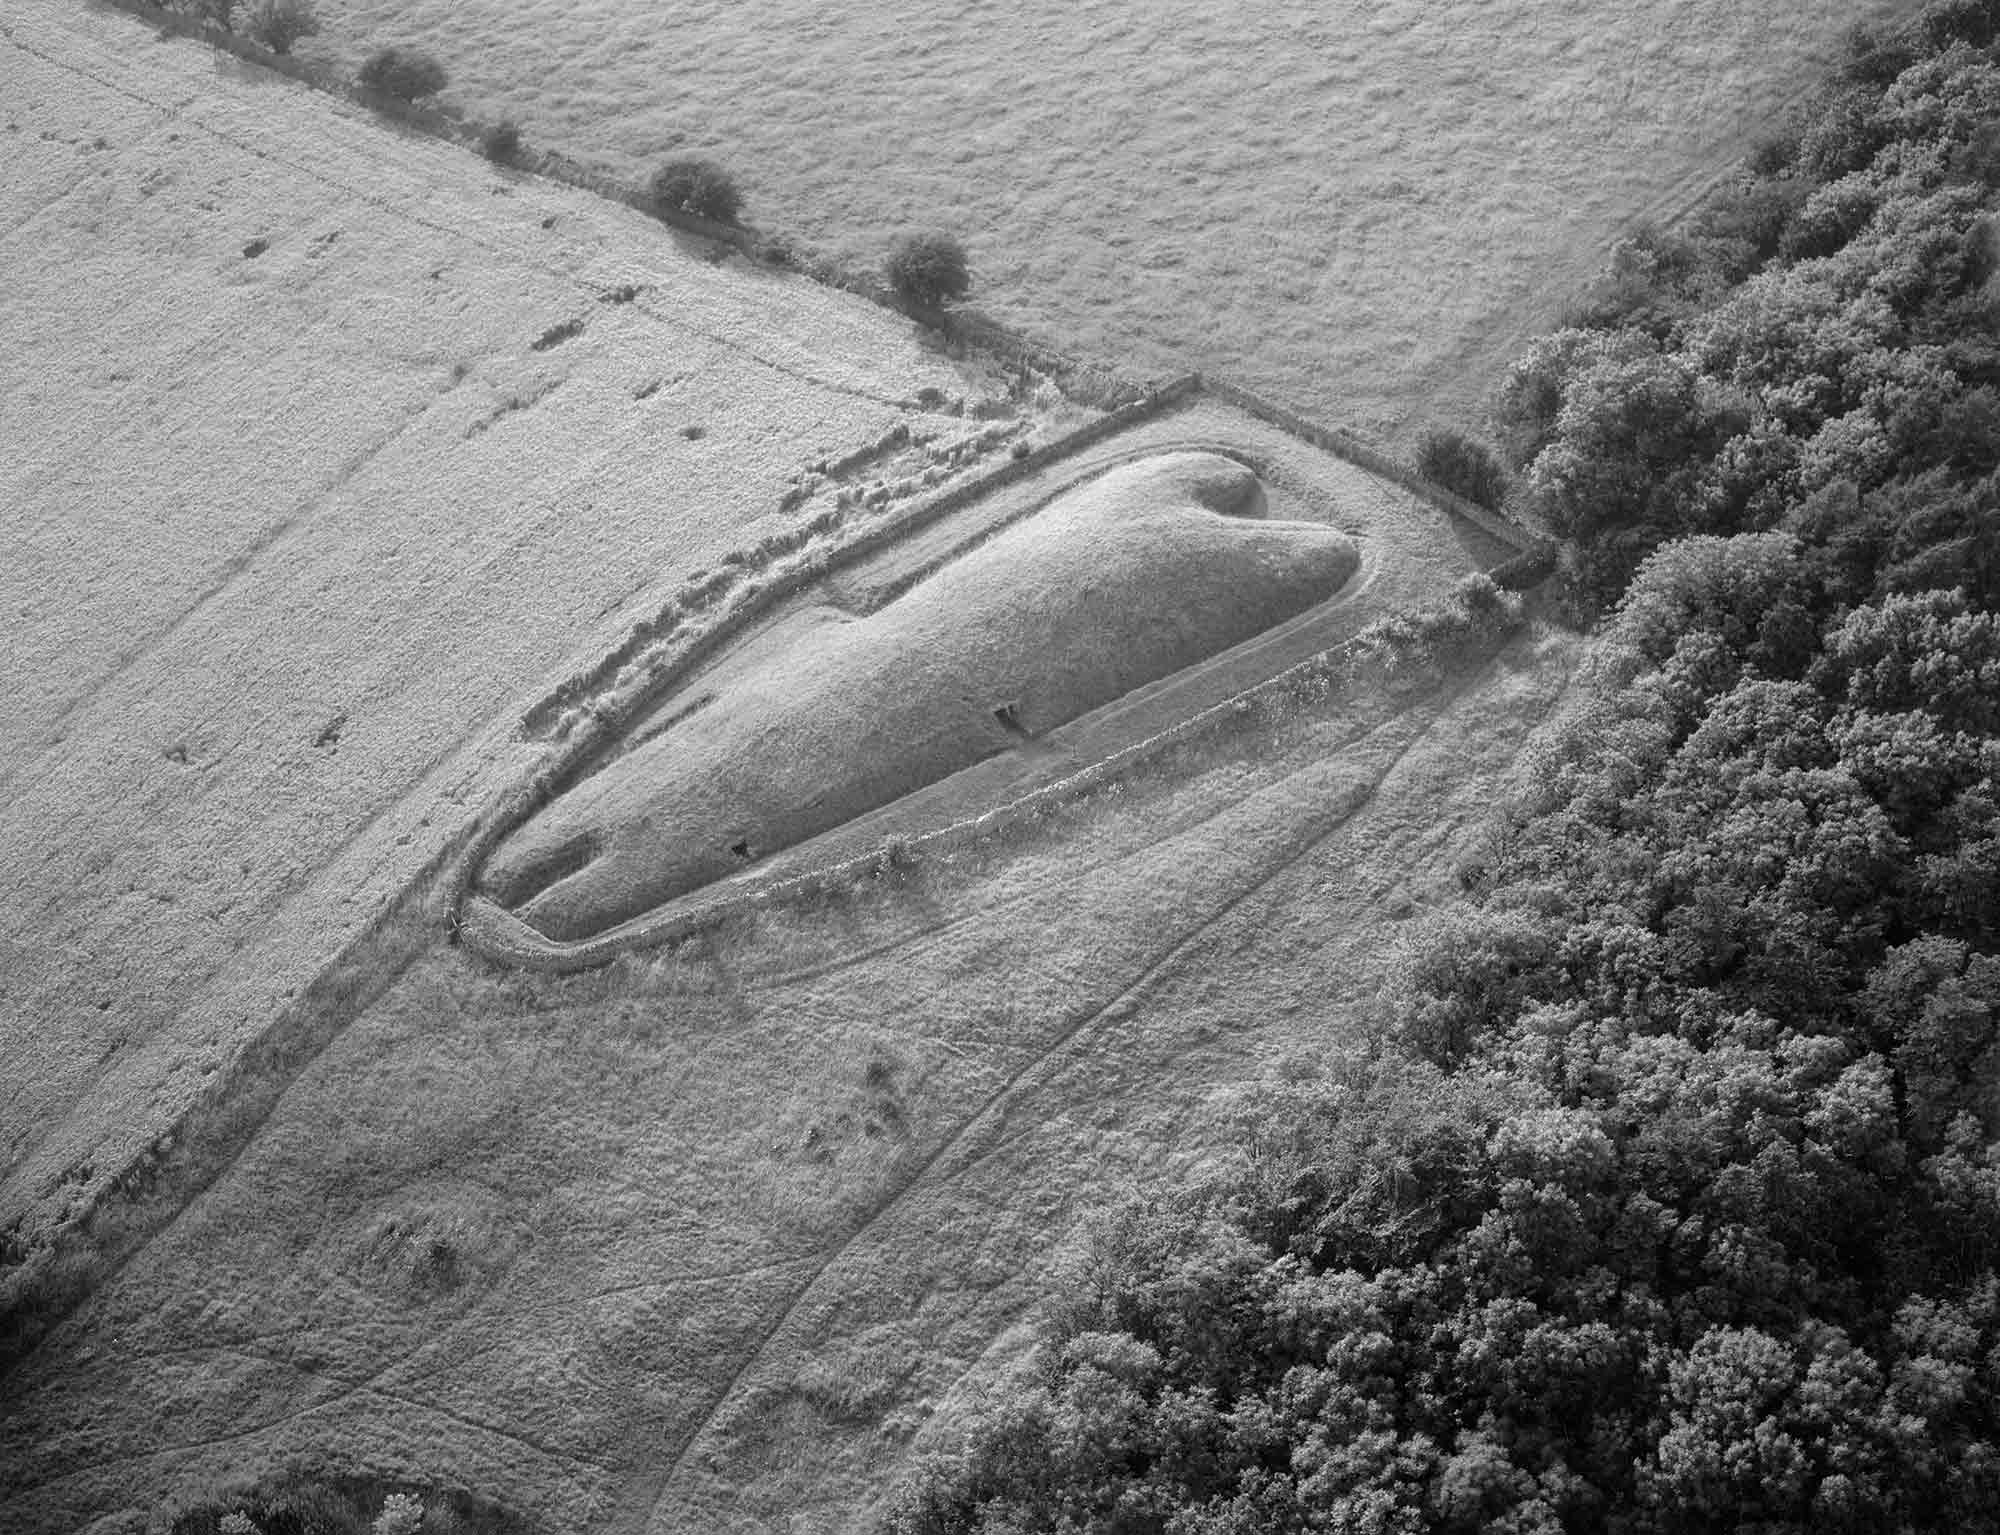 Black and white oblique aerial photograph of long barrow set diagonally in the centre of the image. Trapezoid in shape, the barrow tapers towards the left. At the wider end is a wide, curved recess. At the opposite end is a narrow, elongated recess. The barrow is enclosed by a stone wall and is bordered by grassy fields, a field of cereal and dense woodland.